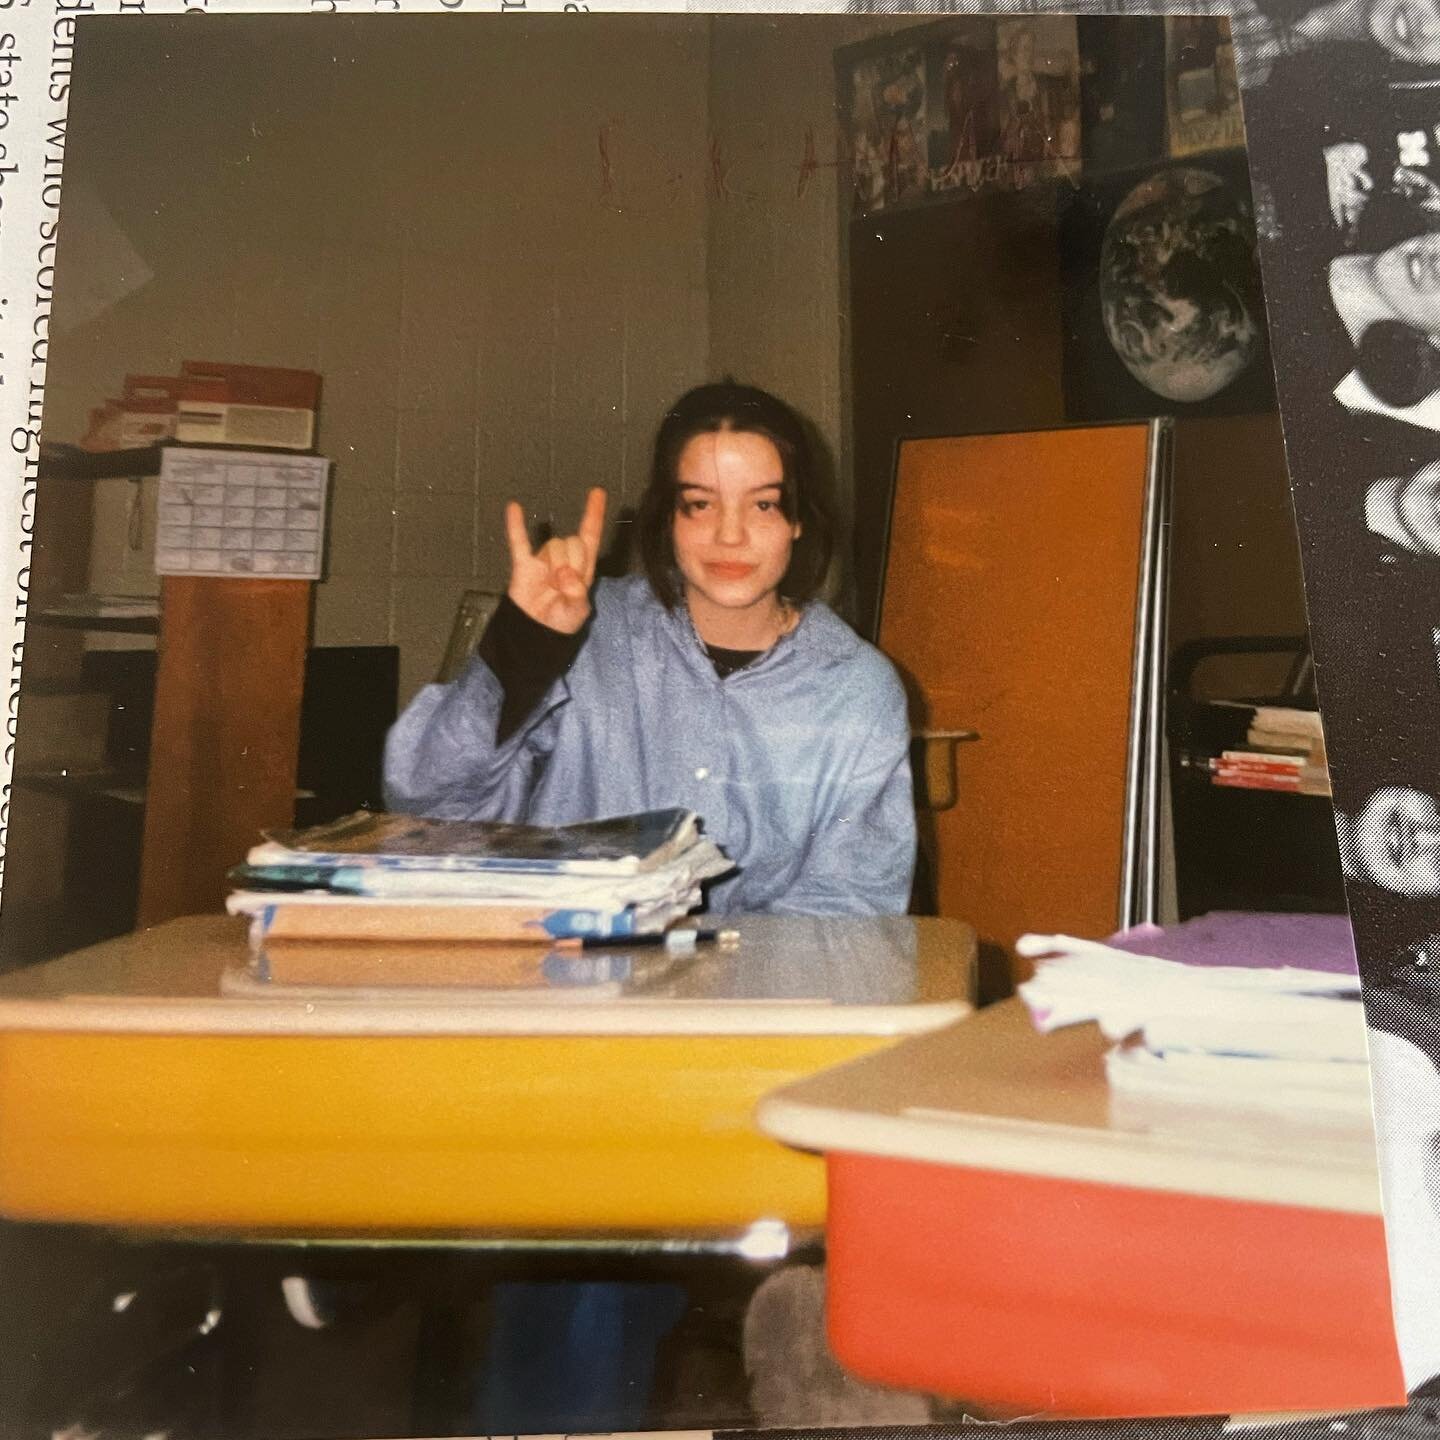 7th grade Angela here to tell you to come to @liars.club tomorrow night to see @touchedbyghoul play for the first time in two years! She says this future is bullshit but rock and roll still prevails always and forever amen #skronk4lyfe #canceltheworl